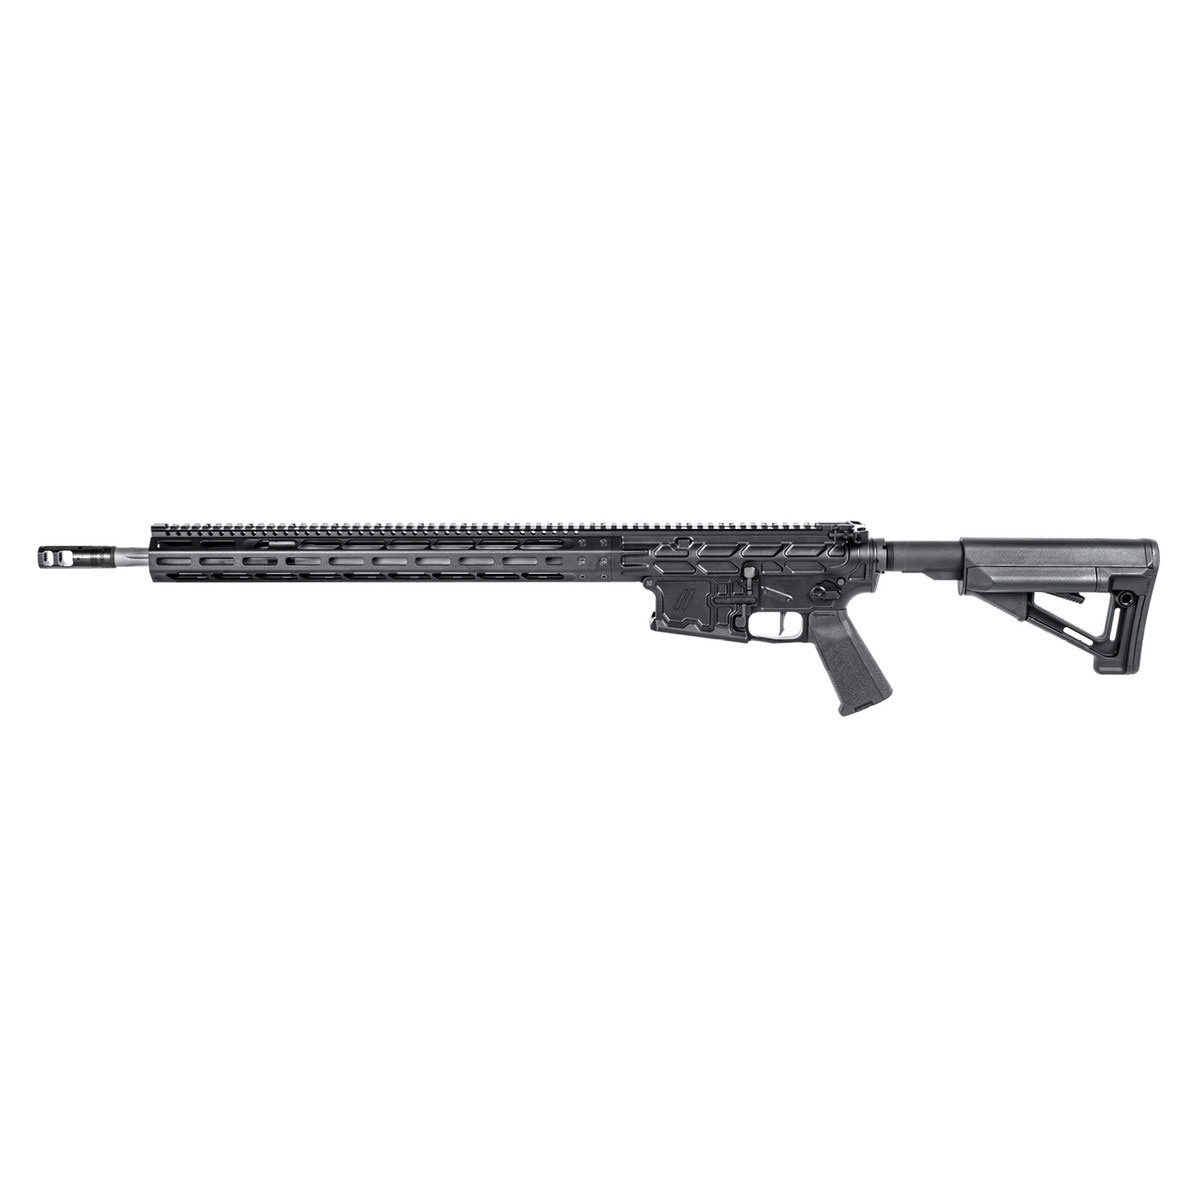 ZEV TECHNOLOGIES SMALL FRAME RIFLE 6.5 CREEDMOOR | Brownells What Size Bore Brush For 6.5 Creedmoor